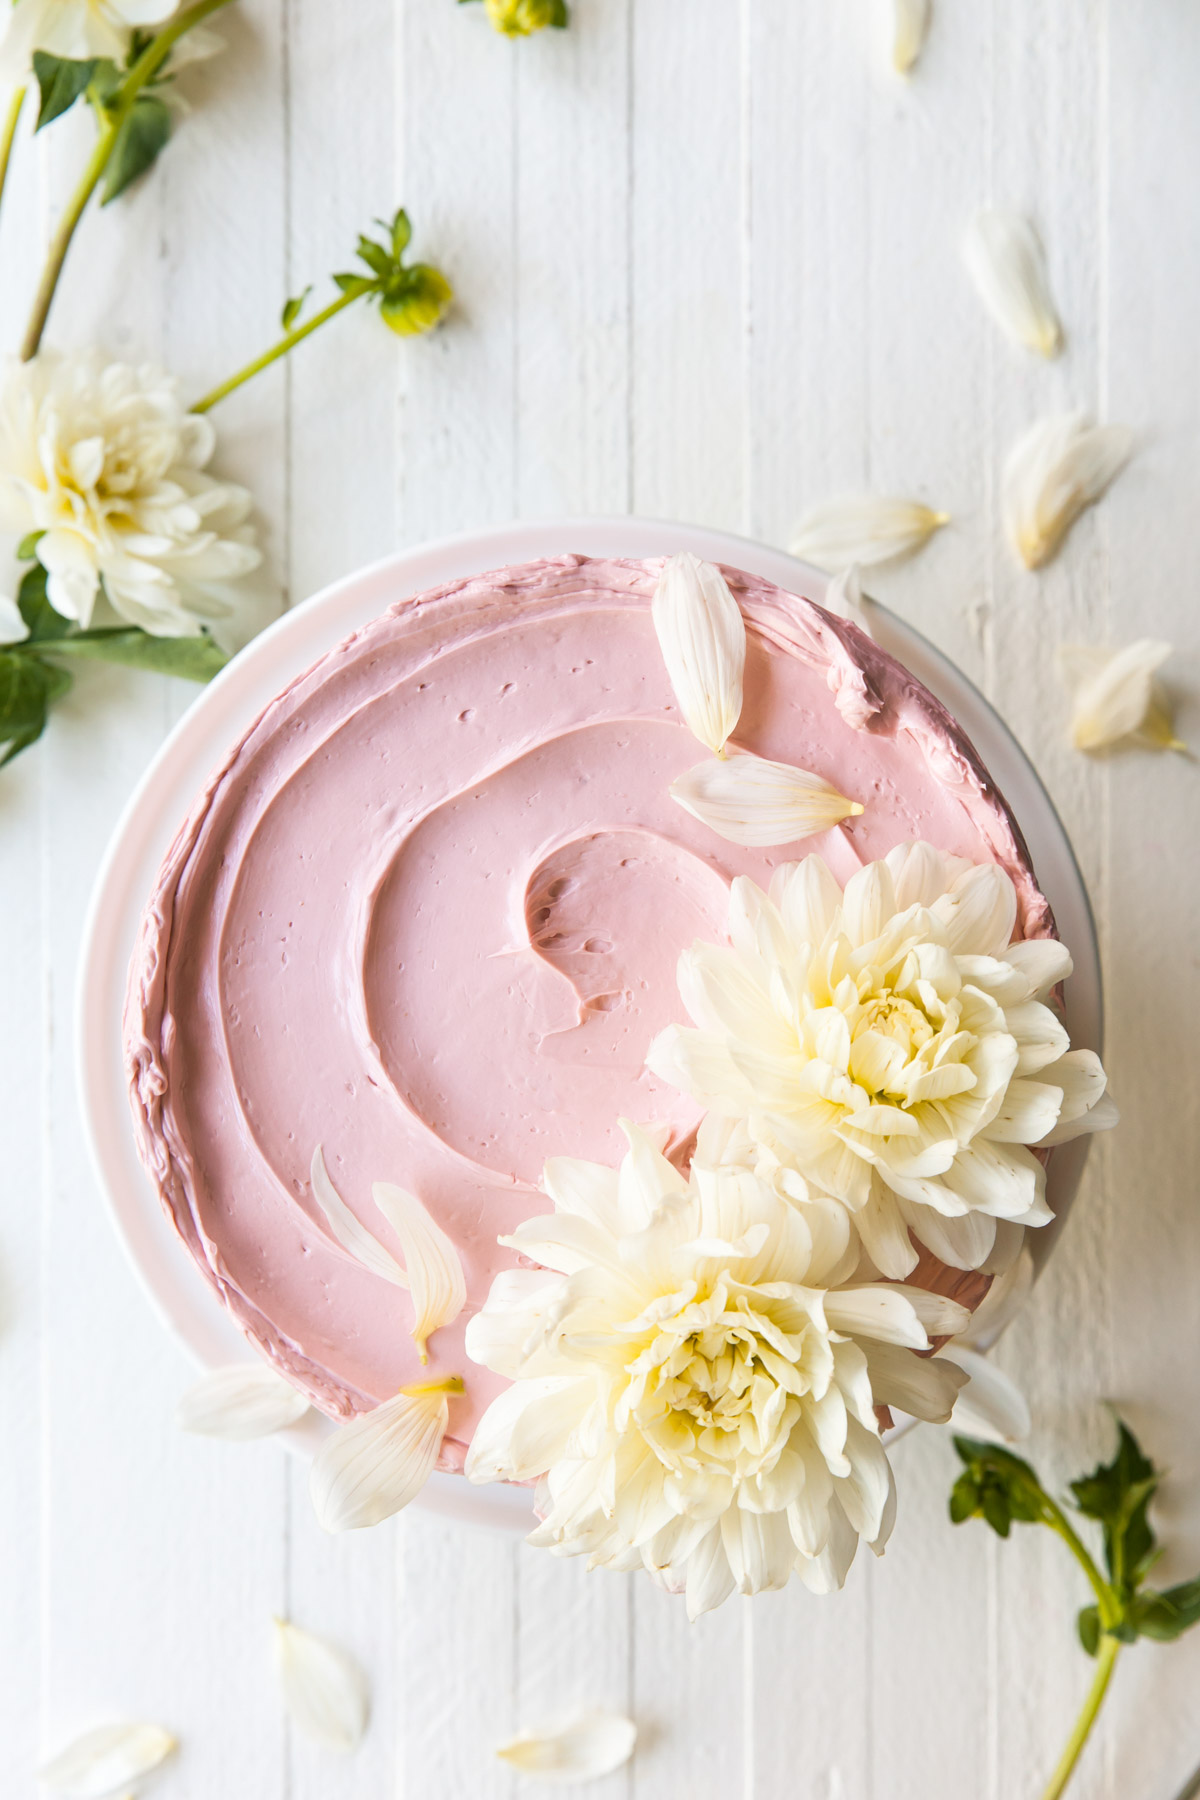 A pink buttercream cake with white flowers on top